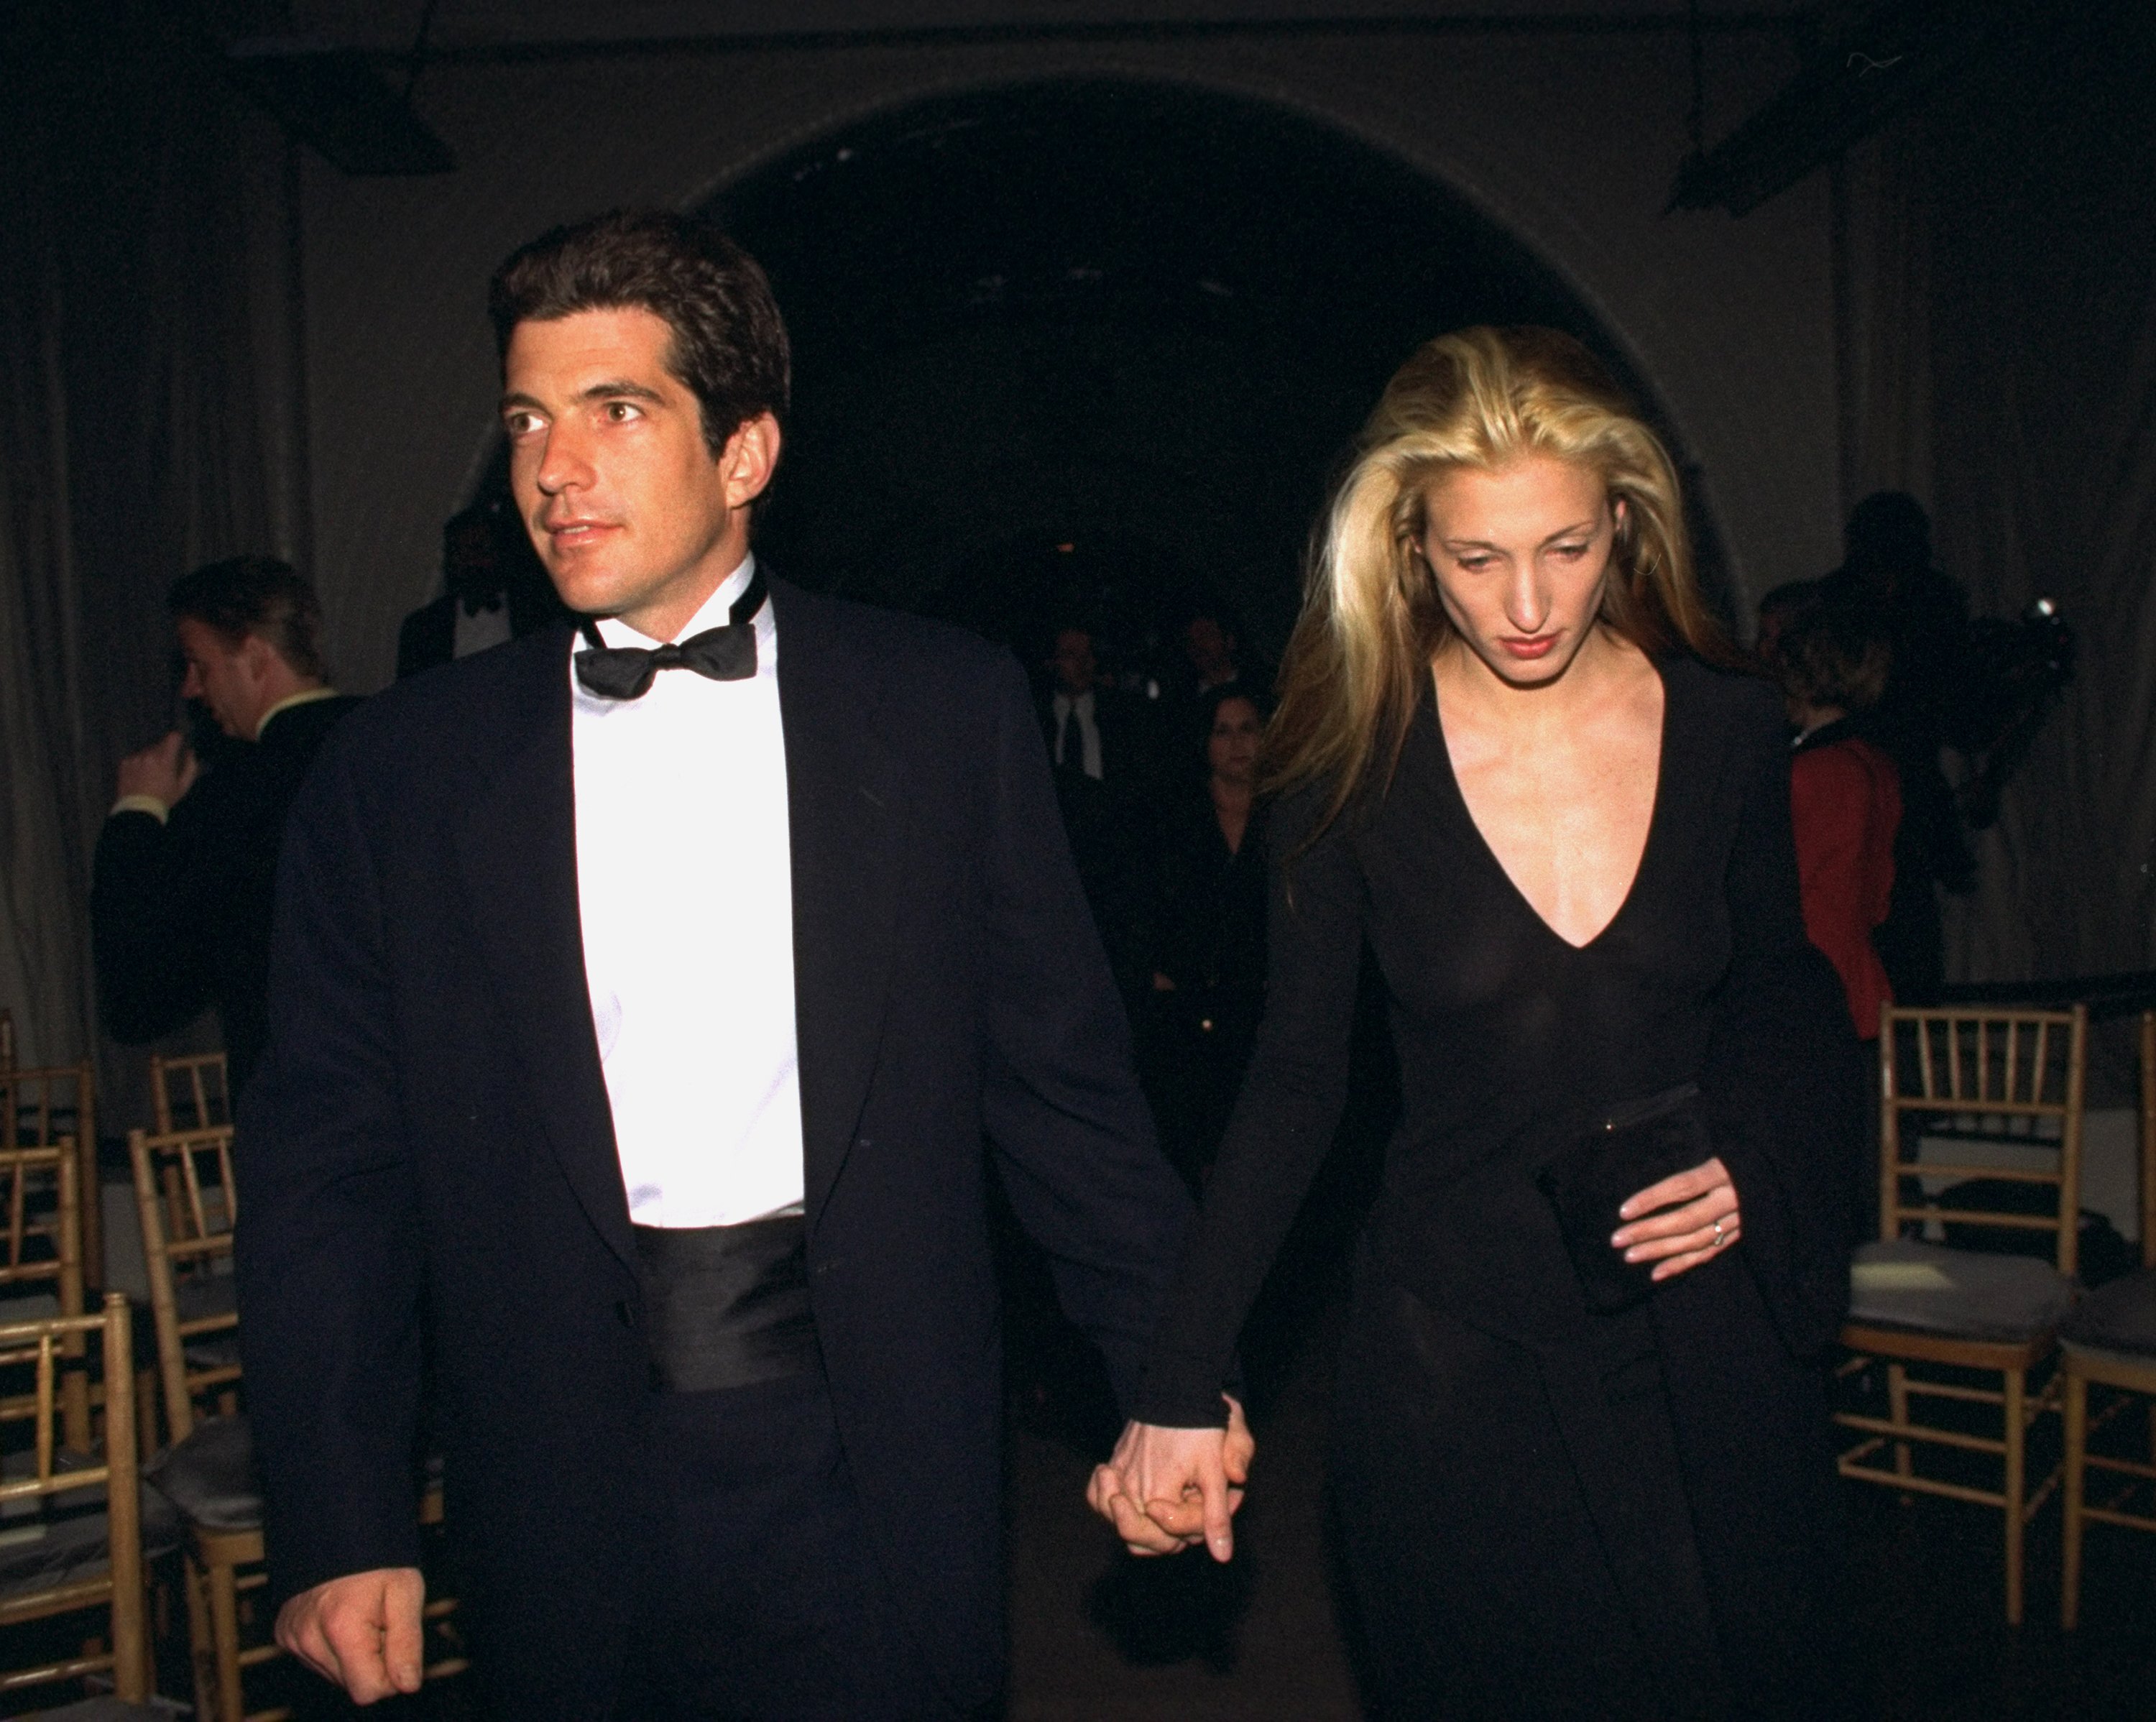 John F. Kennedy Jr. with his girlfriend Carolyn Bessette, a Calvin Klein publicist at Municipal Art Society of New York Benefit at the 69th Regiment Armory. / Source: Getty Images